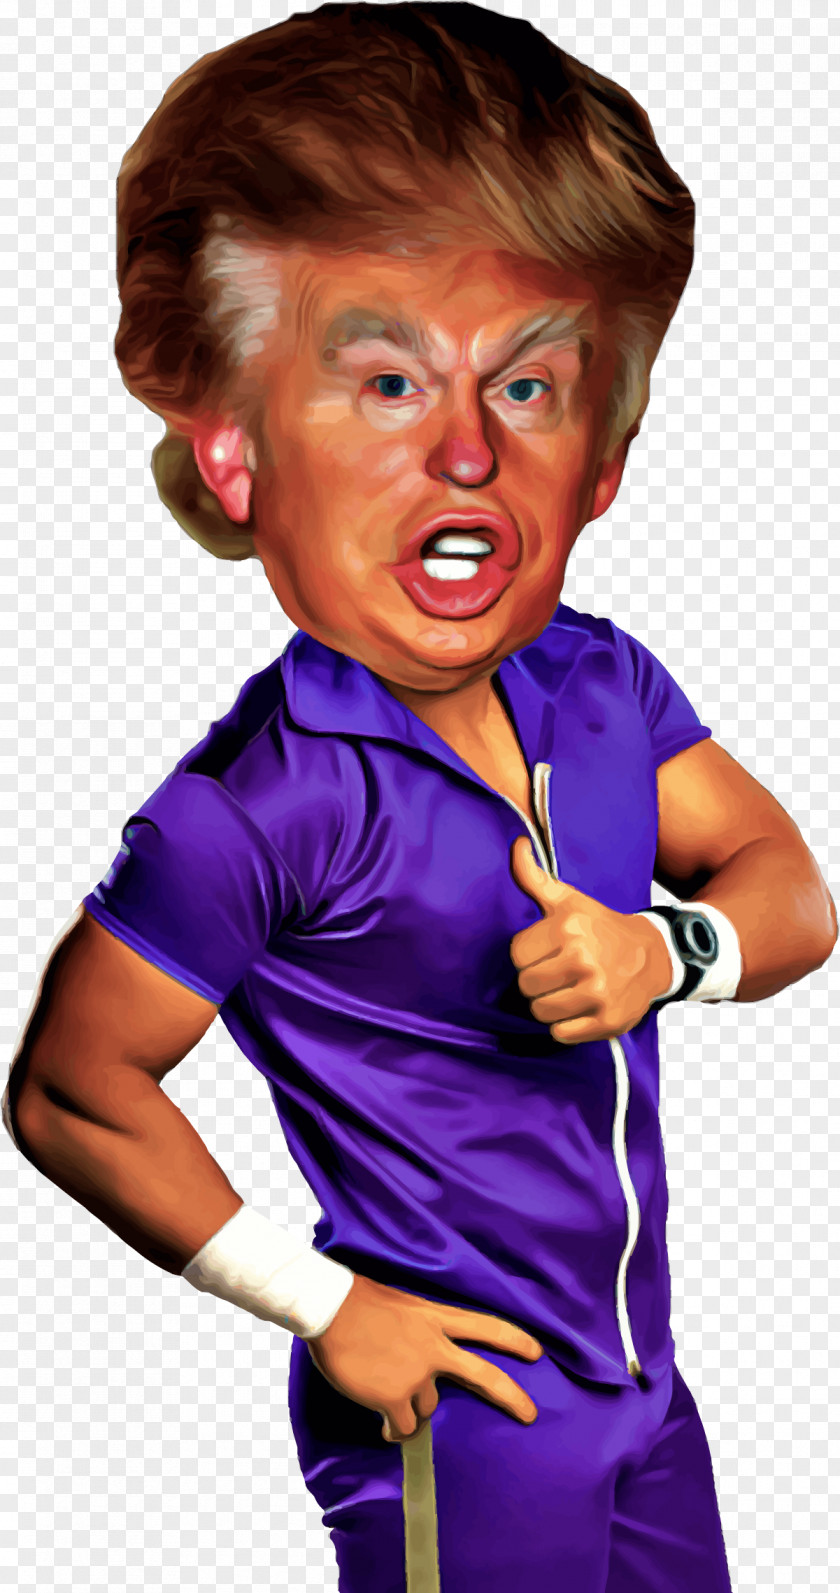 Fun Donald Trump President Of The United States US Presidential Election 2016 Republican Party Candidates, PNG